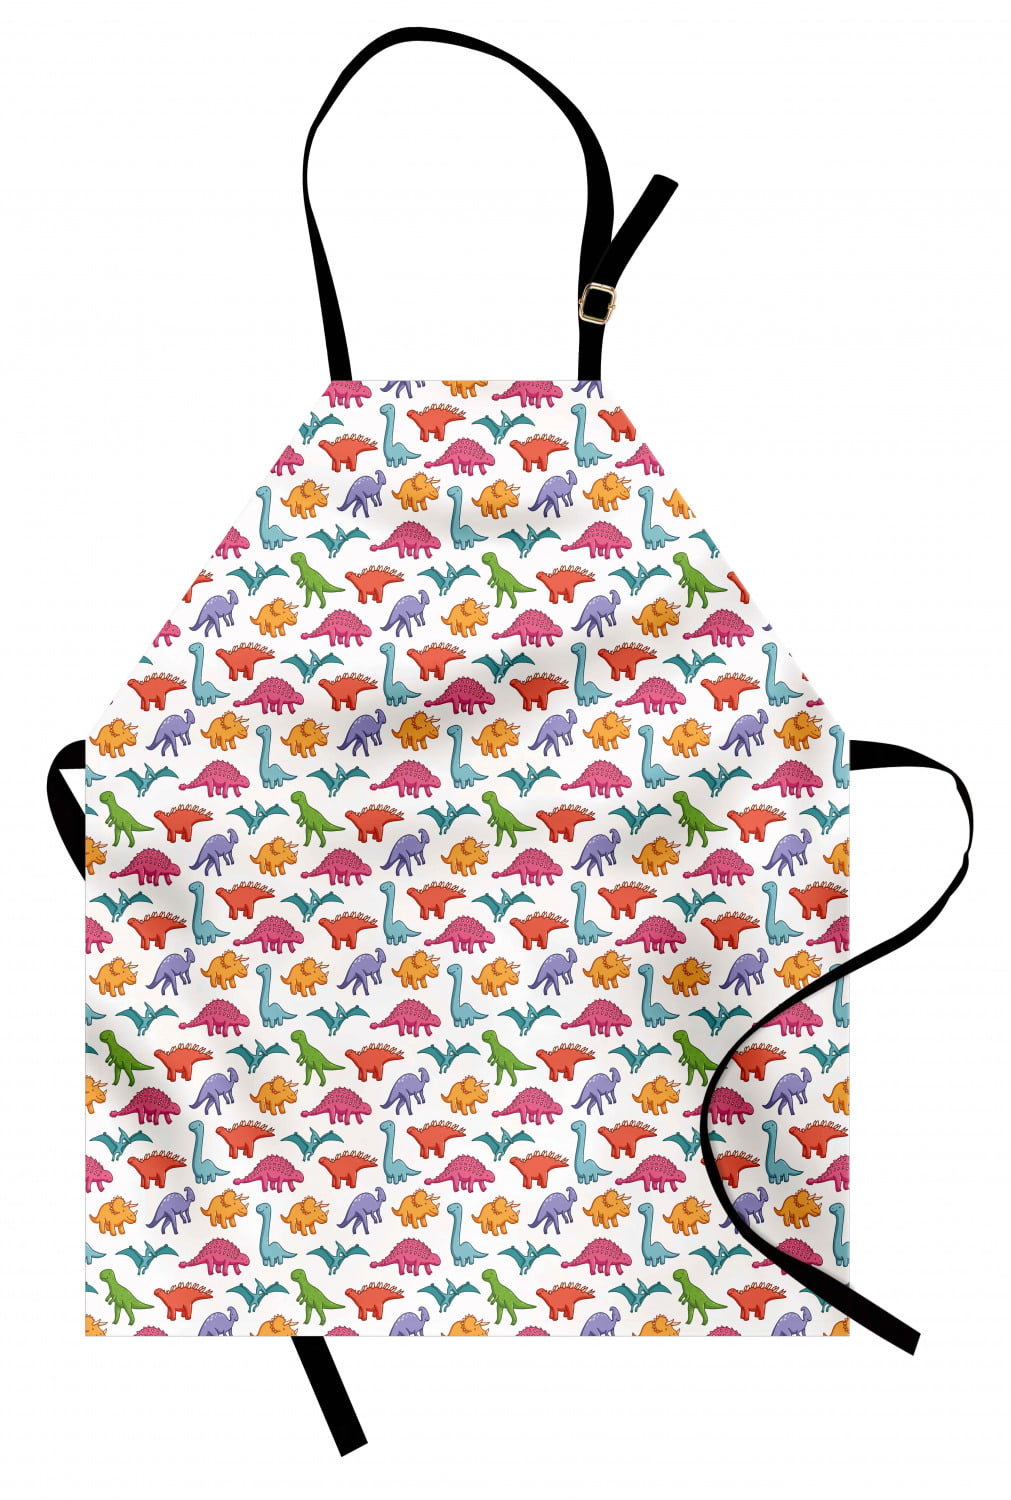 Kids Apron Chef Hat Set,Colorful Nursery Rhymes Kitchen Cooking Kits Aprons with Pocket for Baking Painting Gardening School 